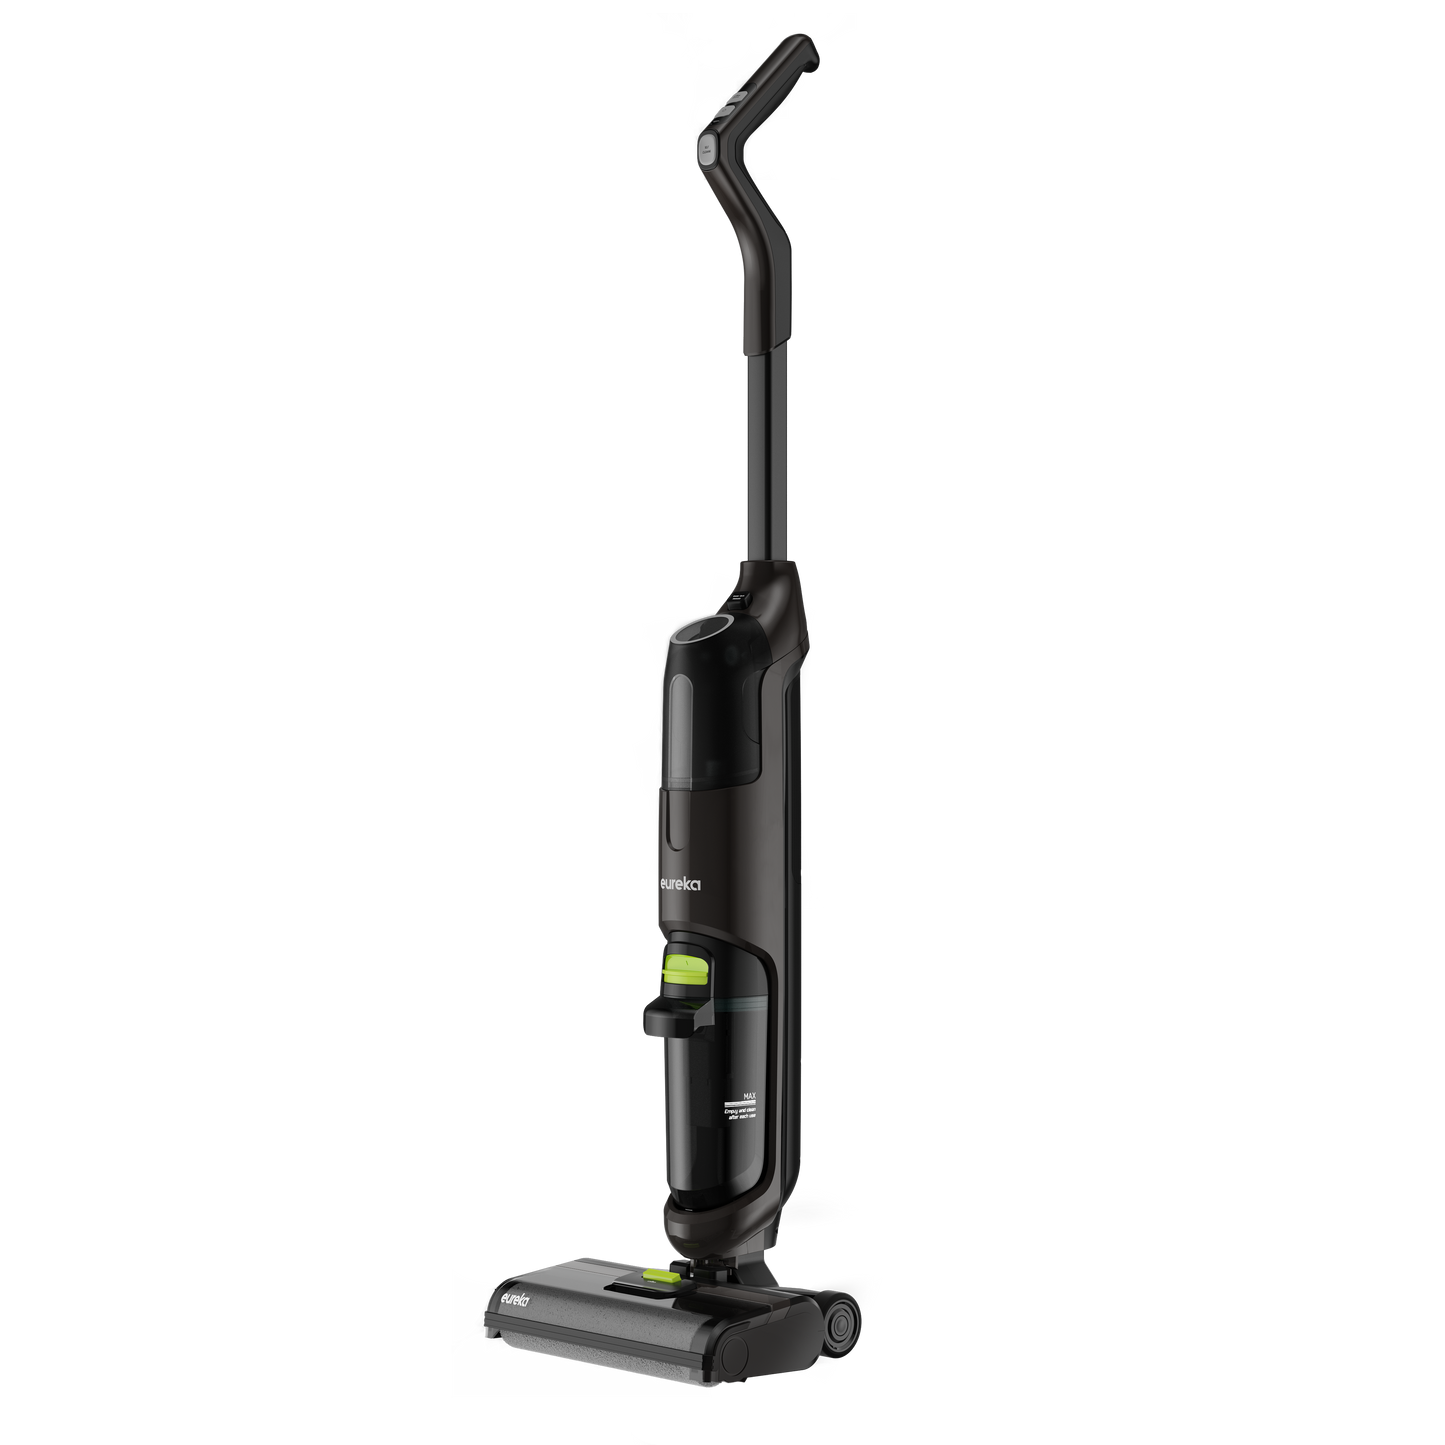 Eureka NEW400 Cordless Wet Dry Vacuum All-in-One Mop FREE Portable Speaker and USB mixer/blender